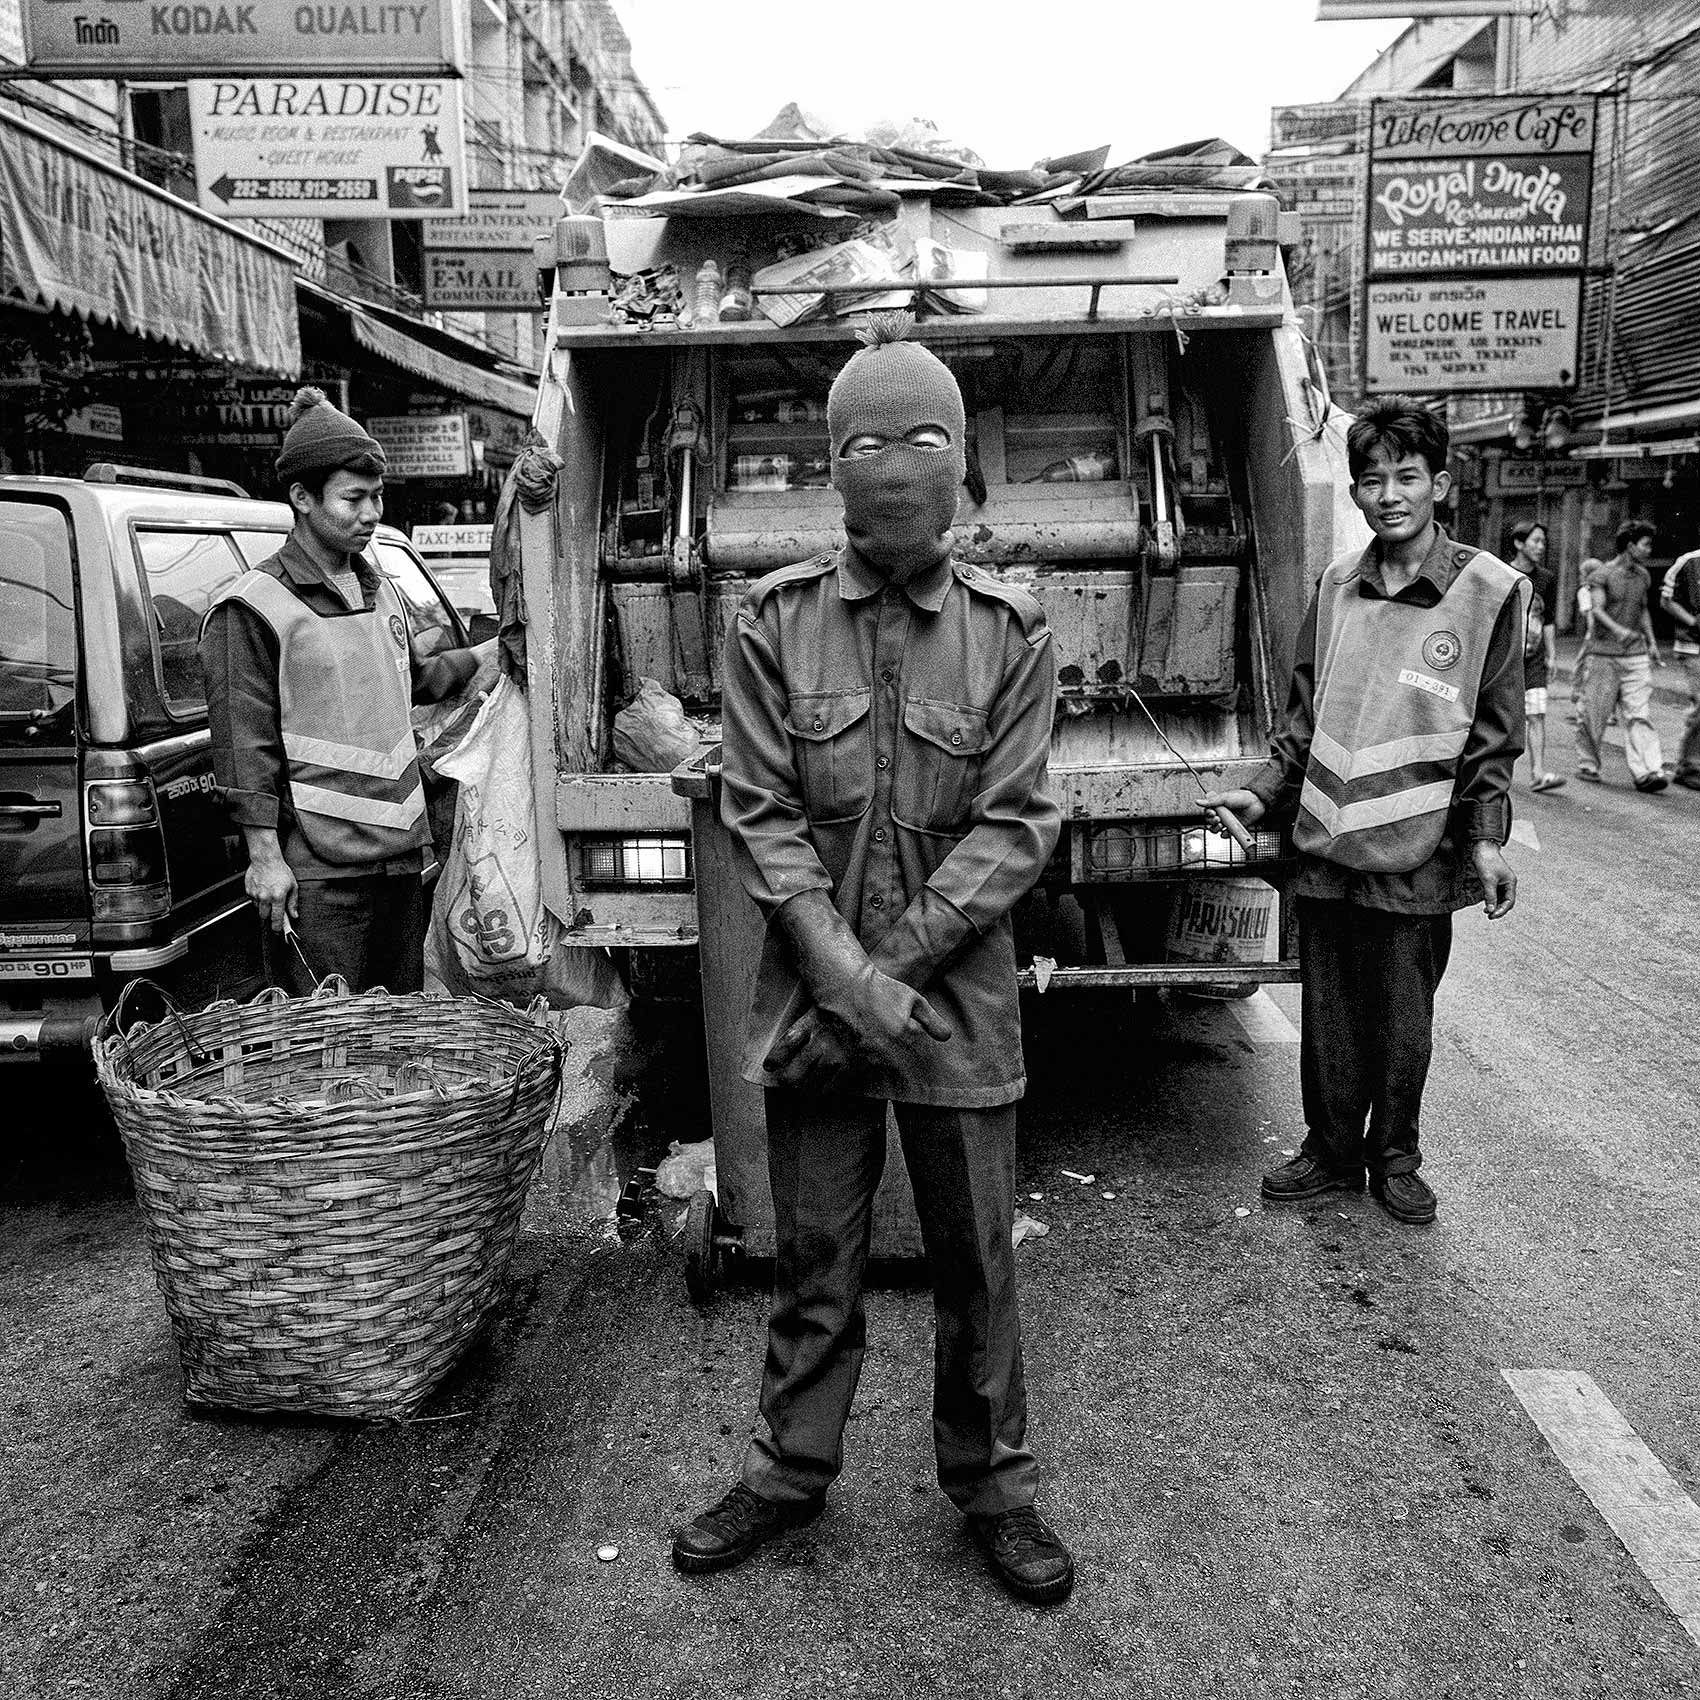 a-group-of-garbagemen-pose-for-a-photo-on-the-streets-of-bangkok-thailand